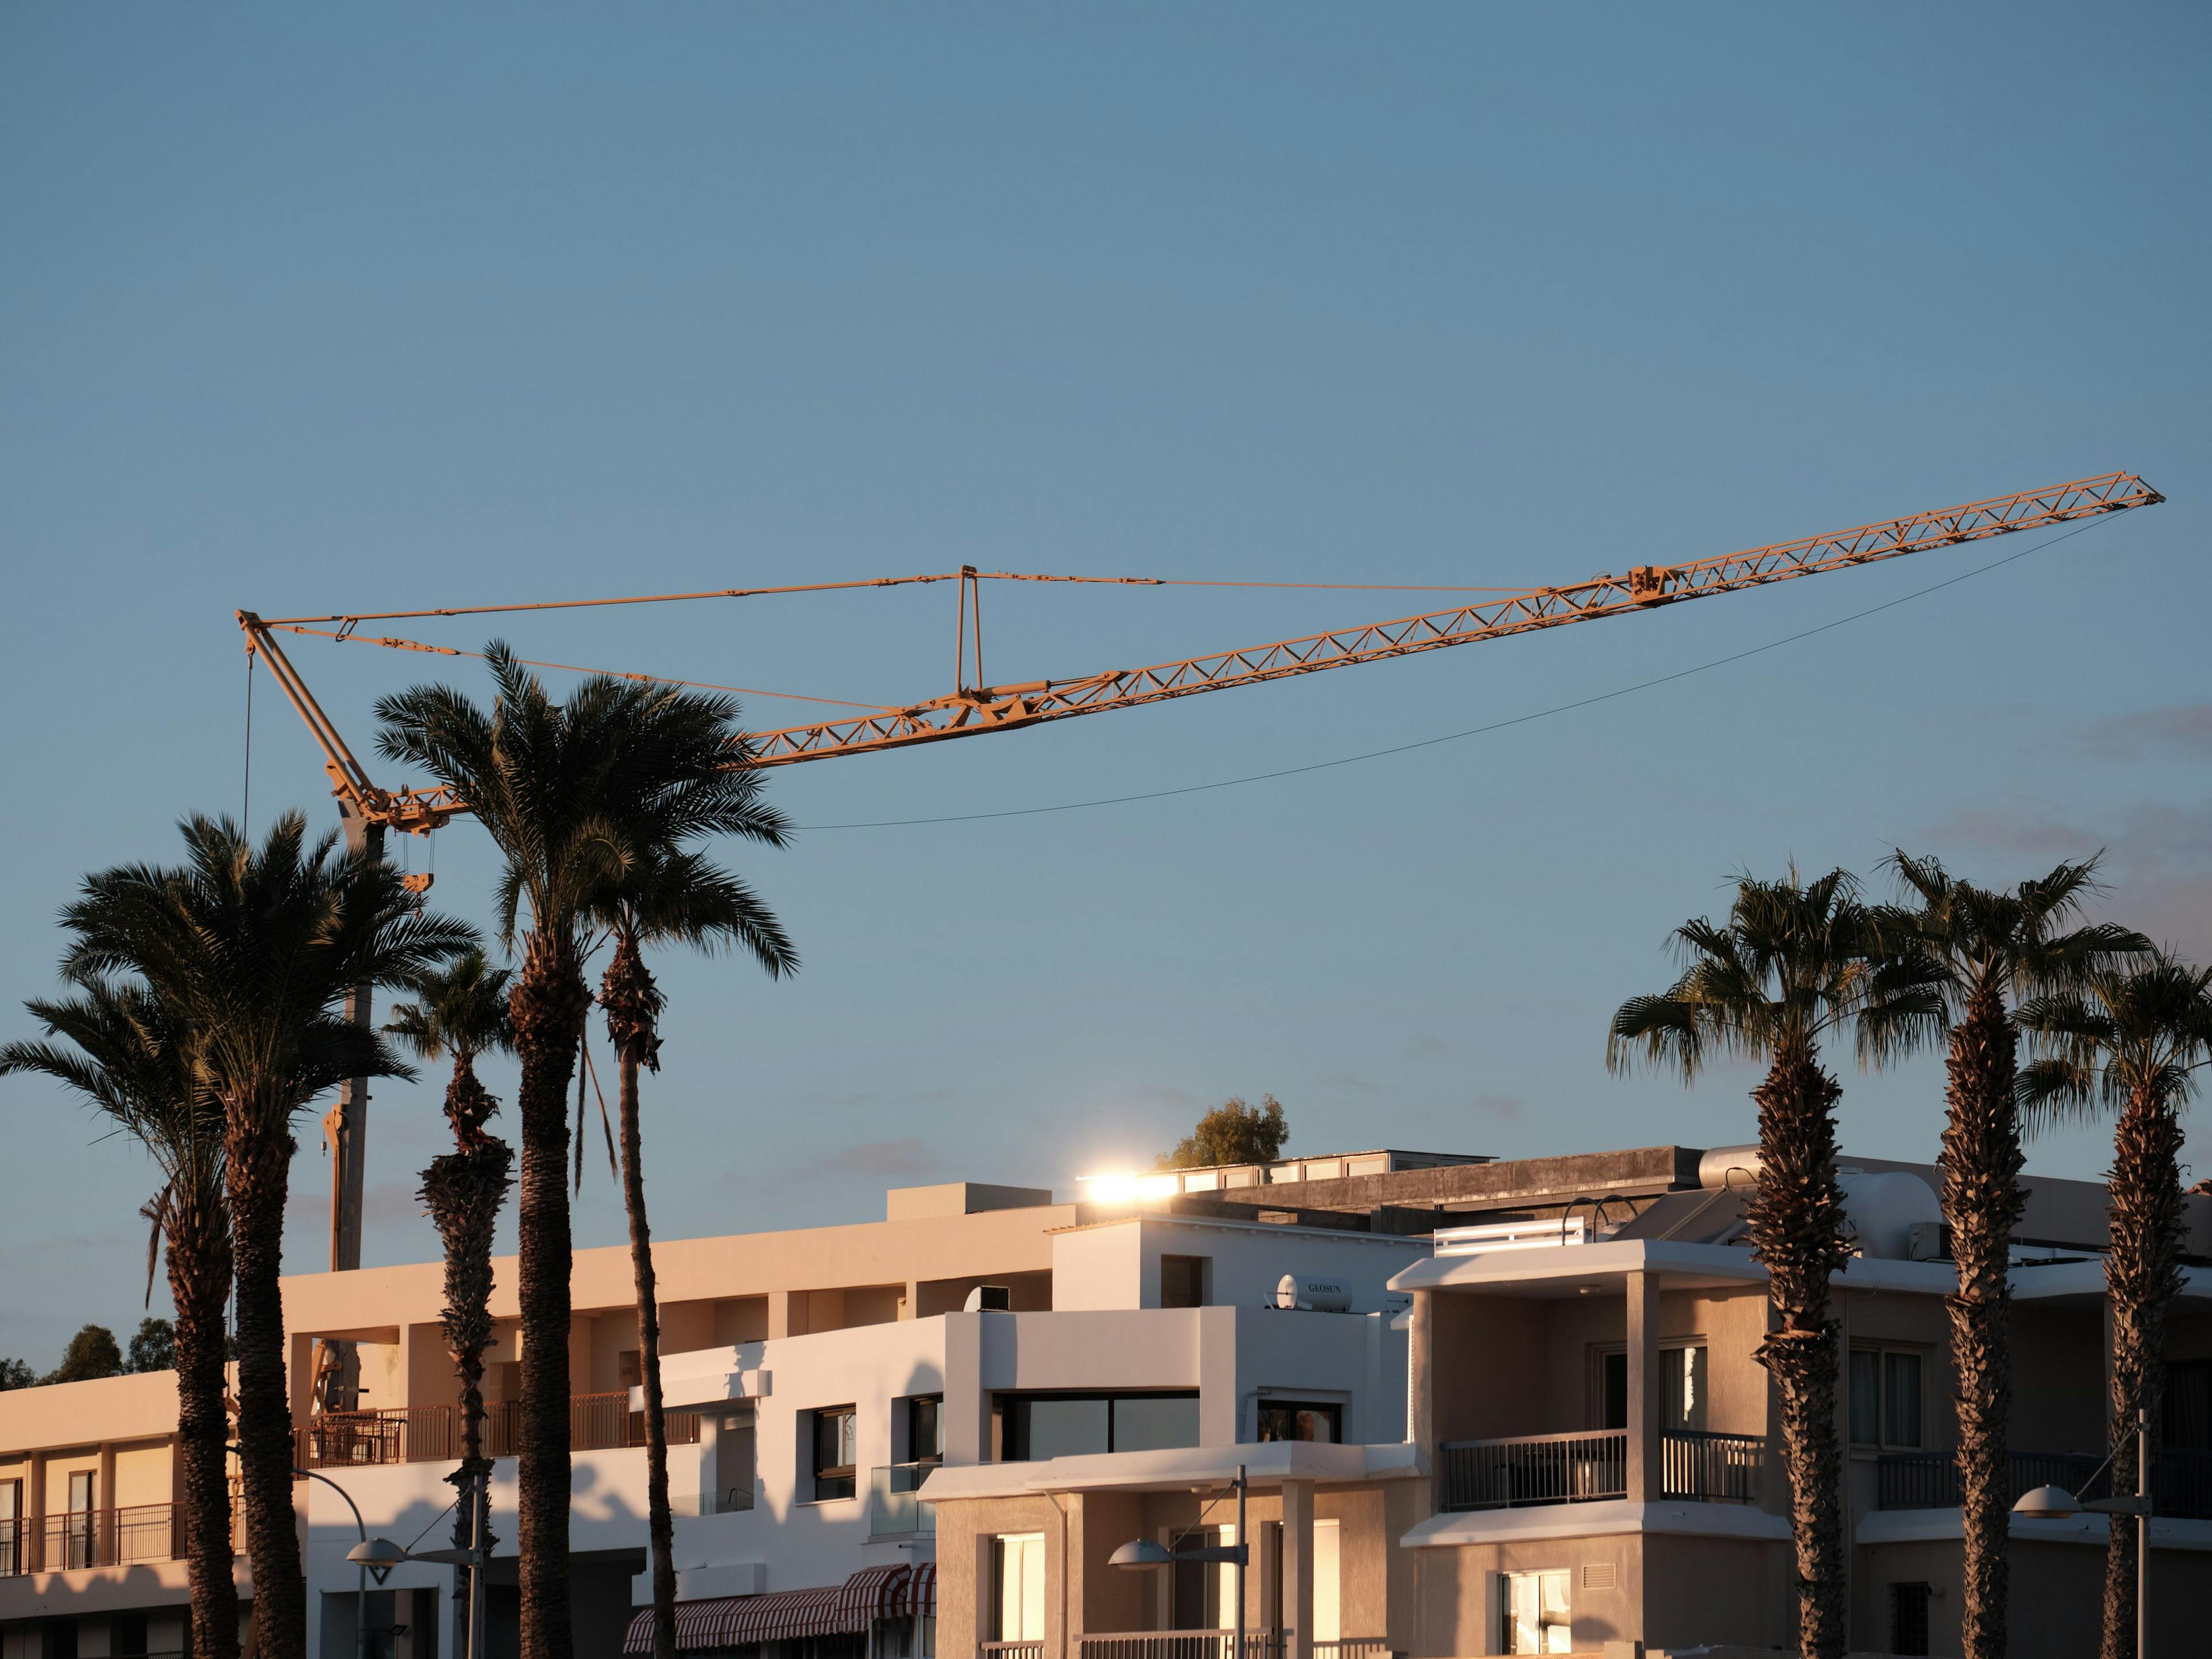 Construction crane over new and old buildings, juxtaposed with palm trees. The sun is low making everything glow.